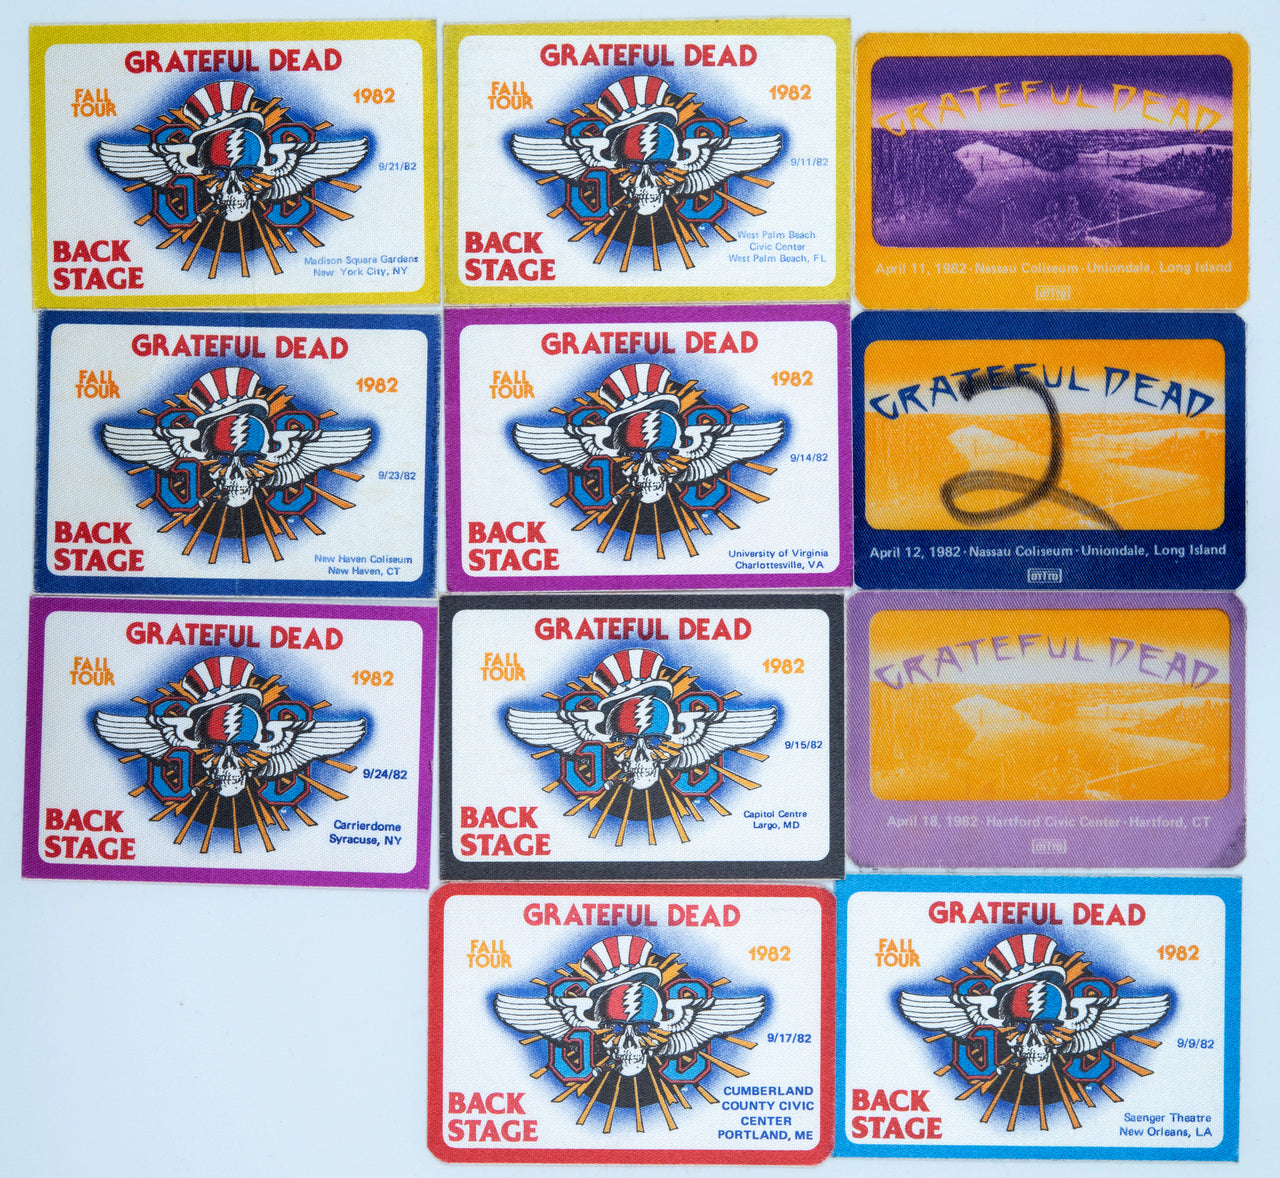 Grateful Dead Backstage Passes (4/11/1982 - 9/24/1982) from Dan Healy